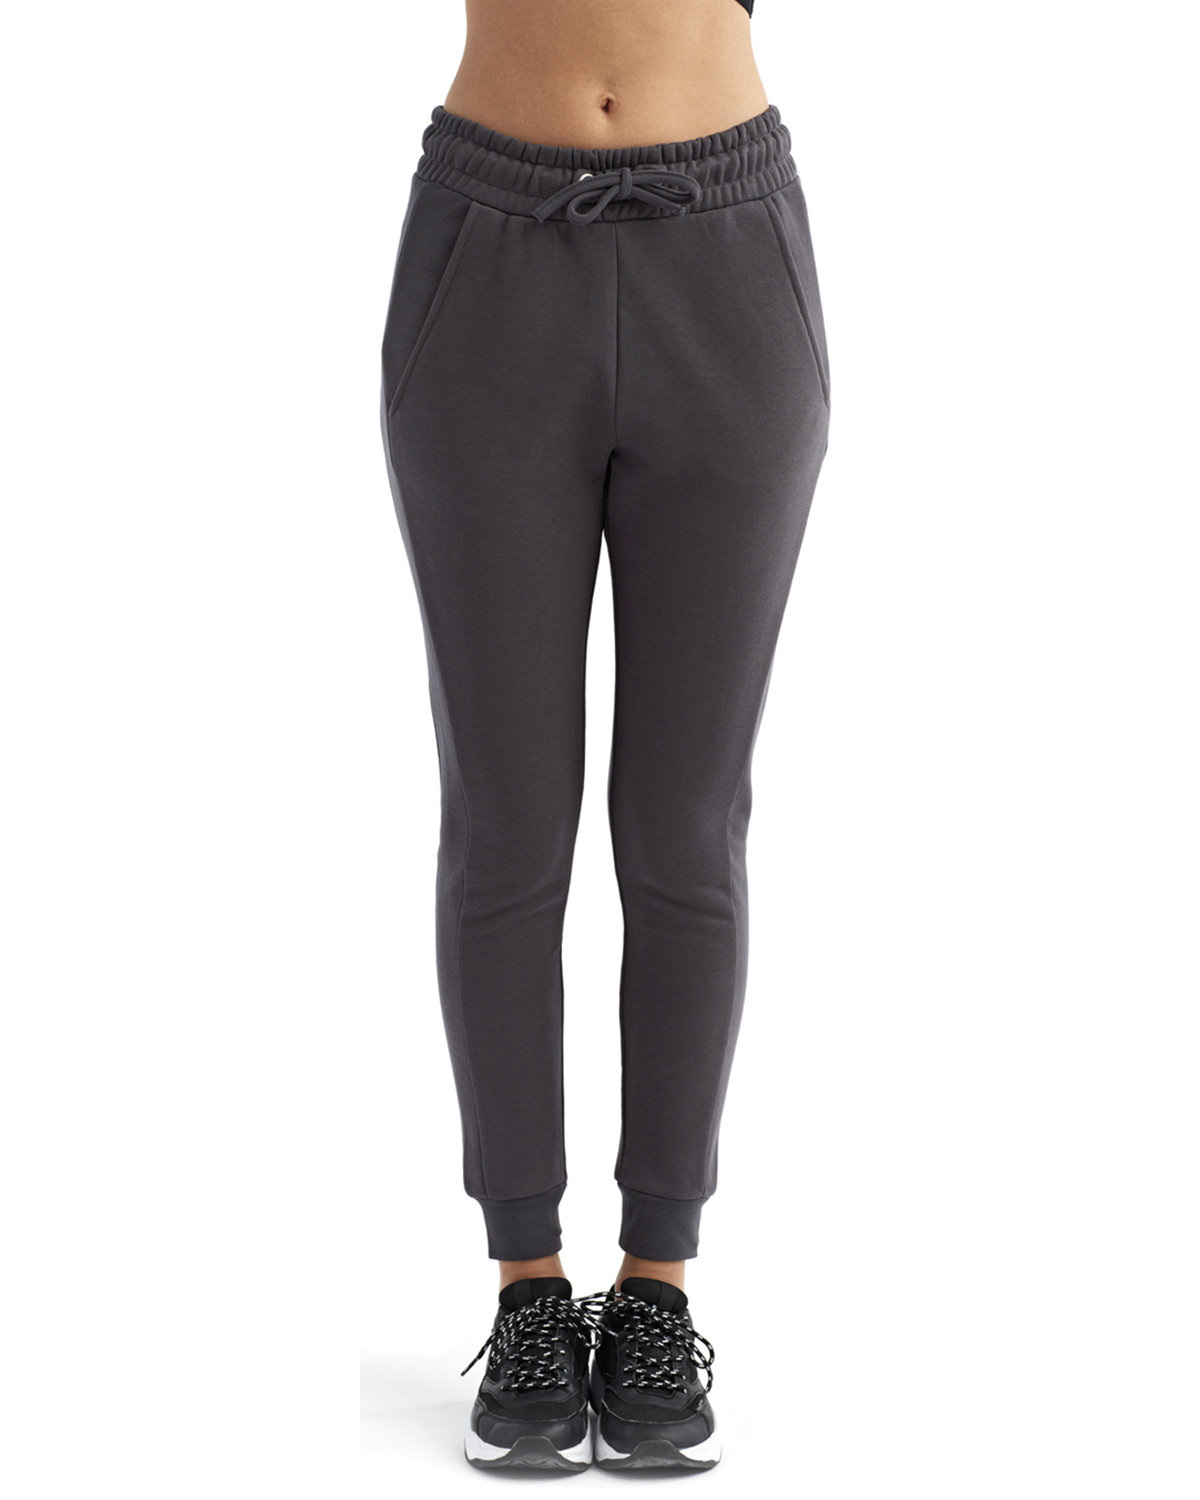 TriDri Ladies' Fitted Maria Jogger | alphabroder